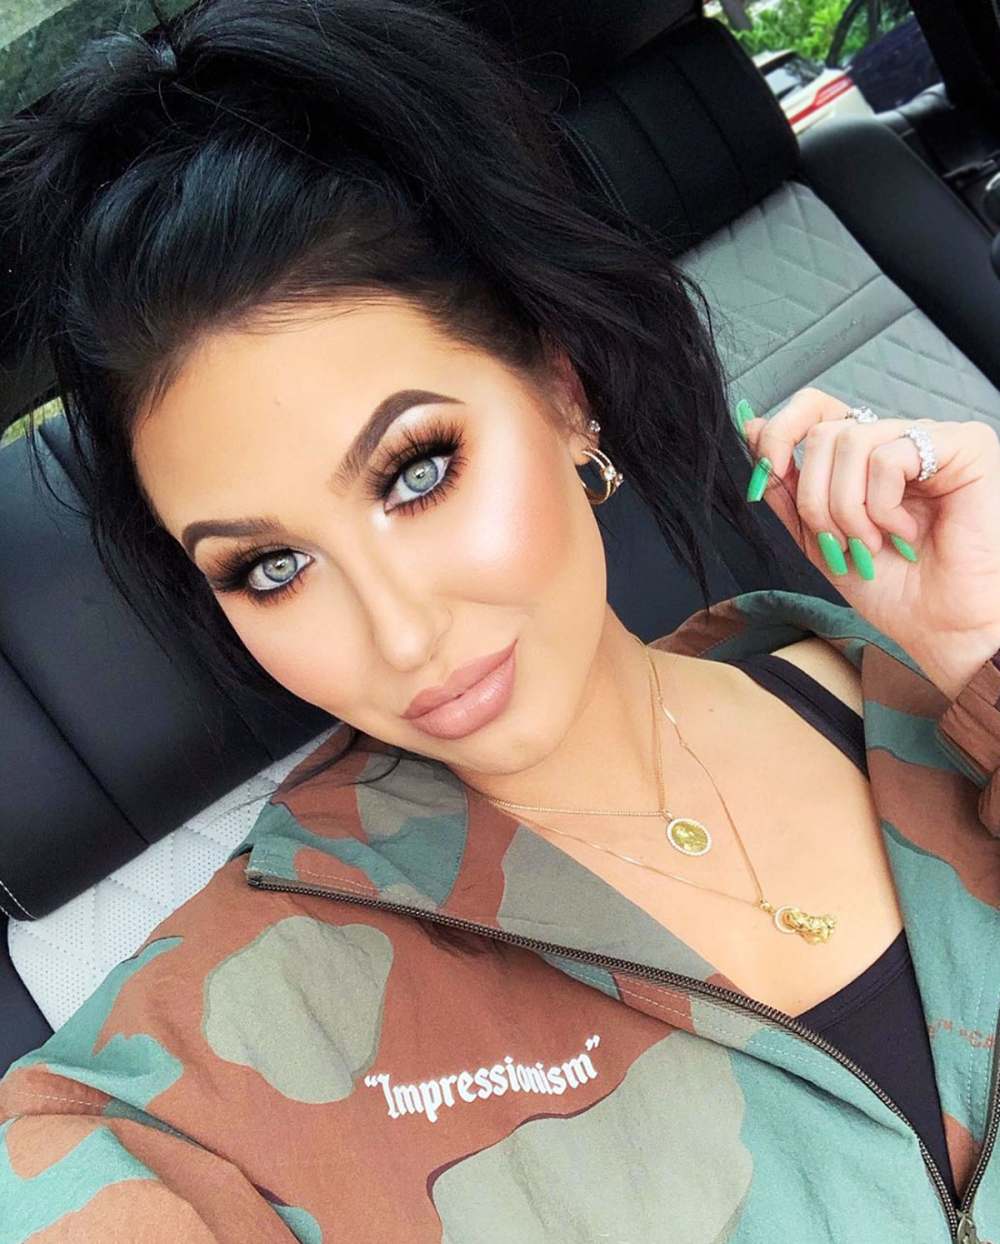 Jaclyn Hill Is Relaunching Jacyln Cosmetics This November